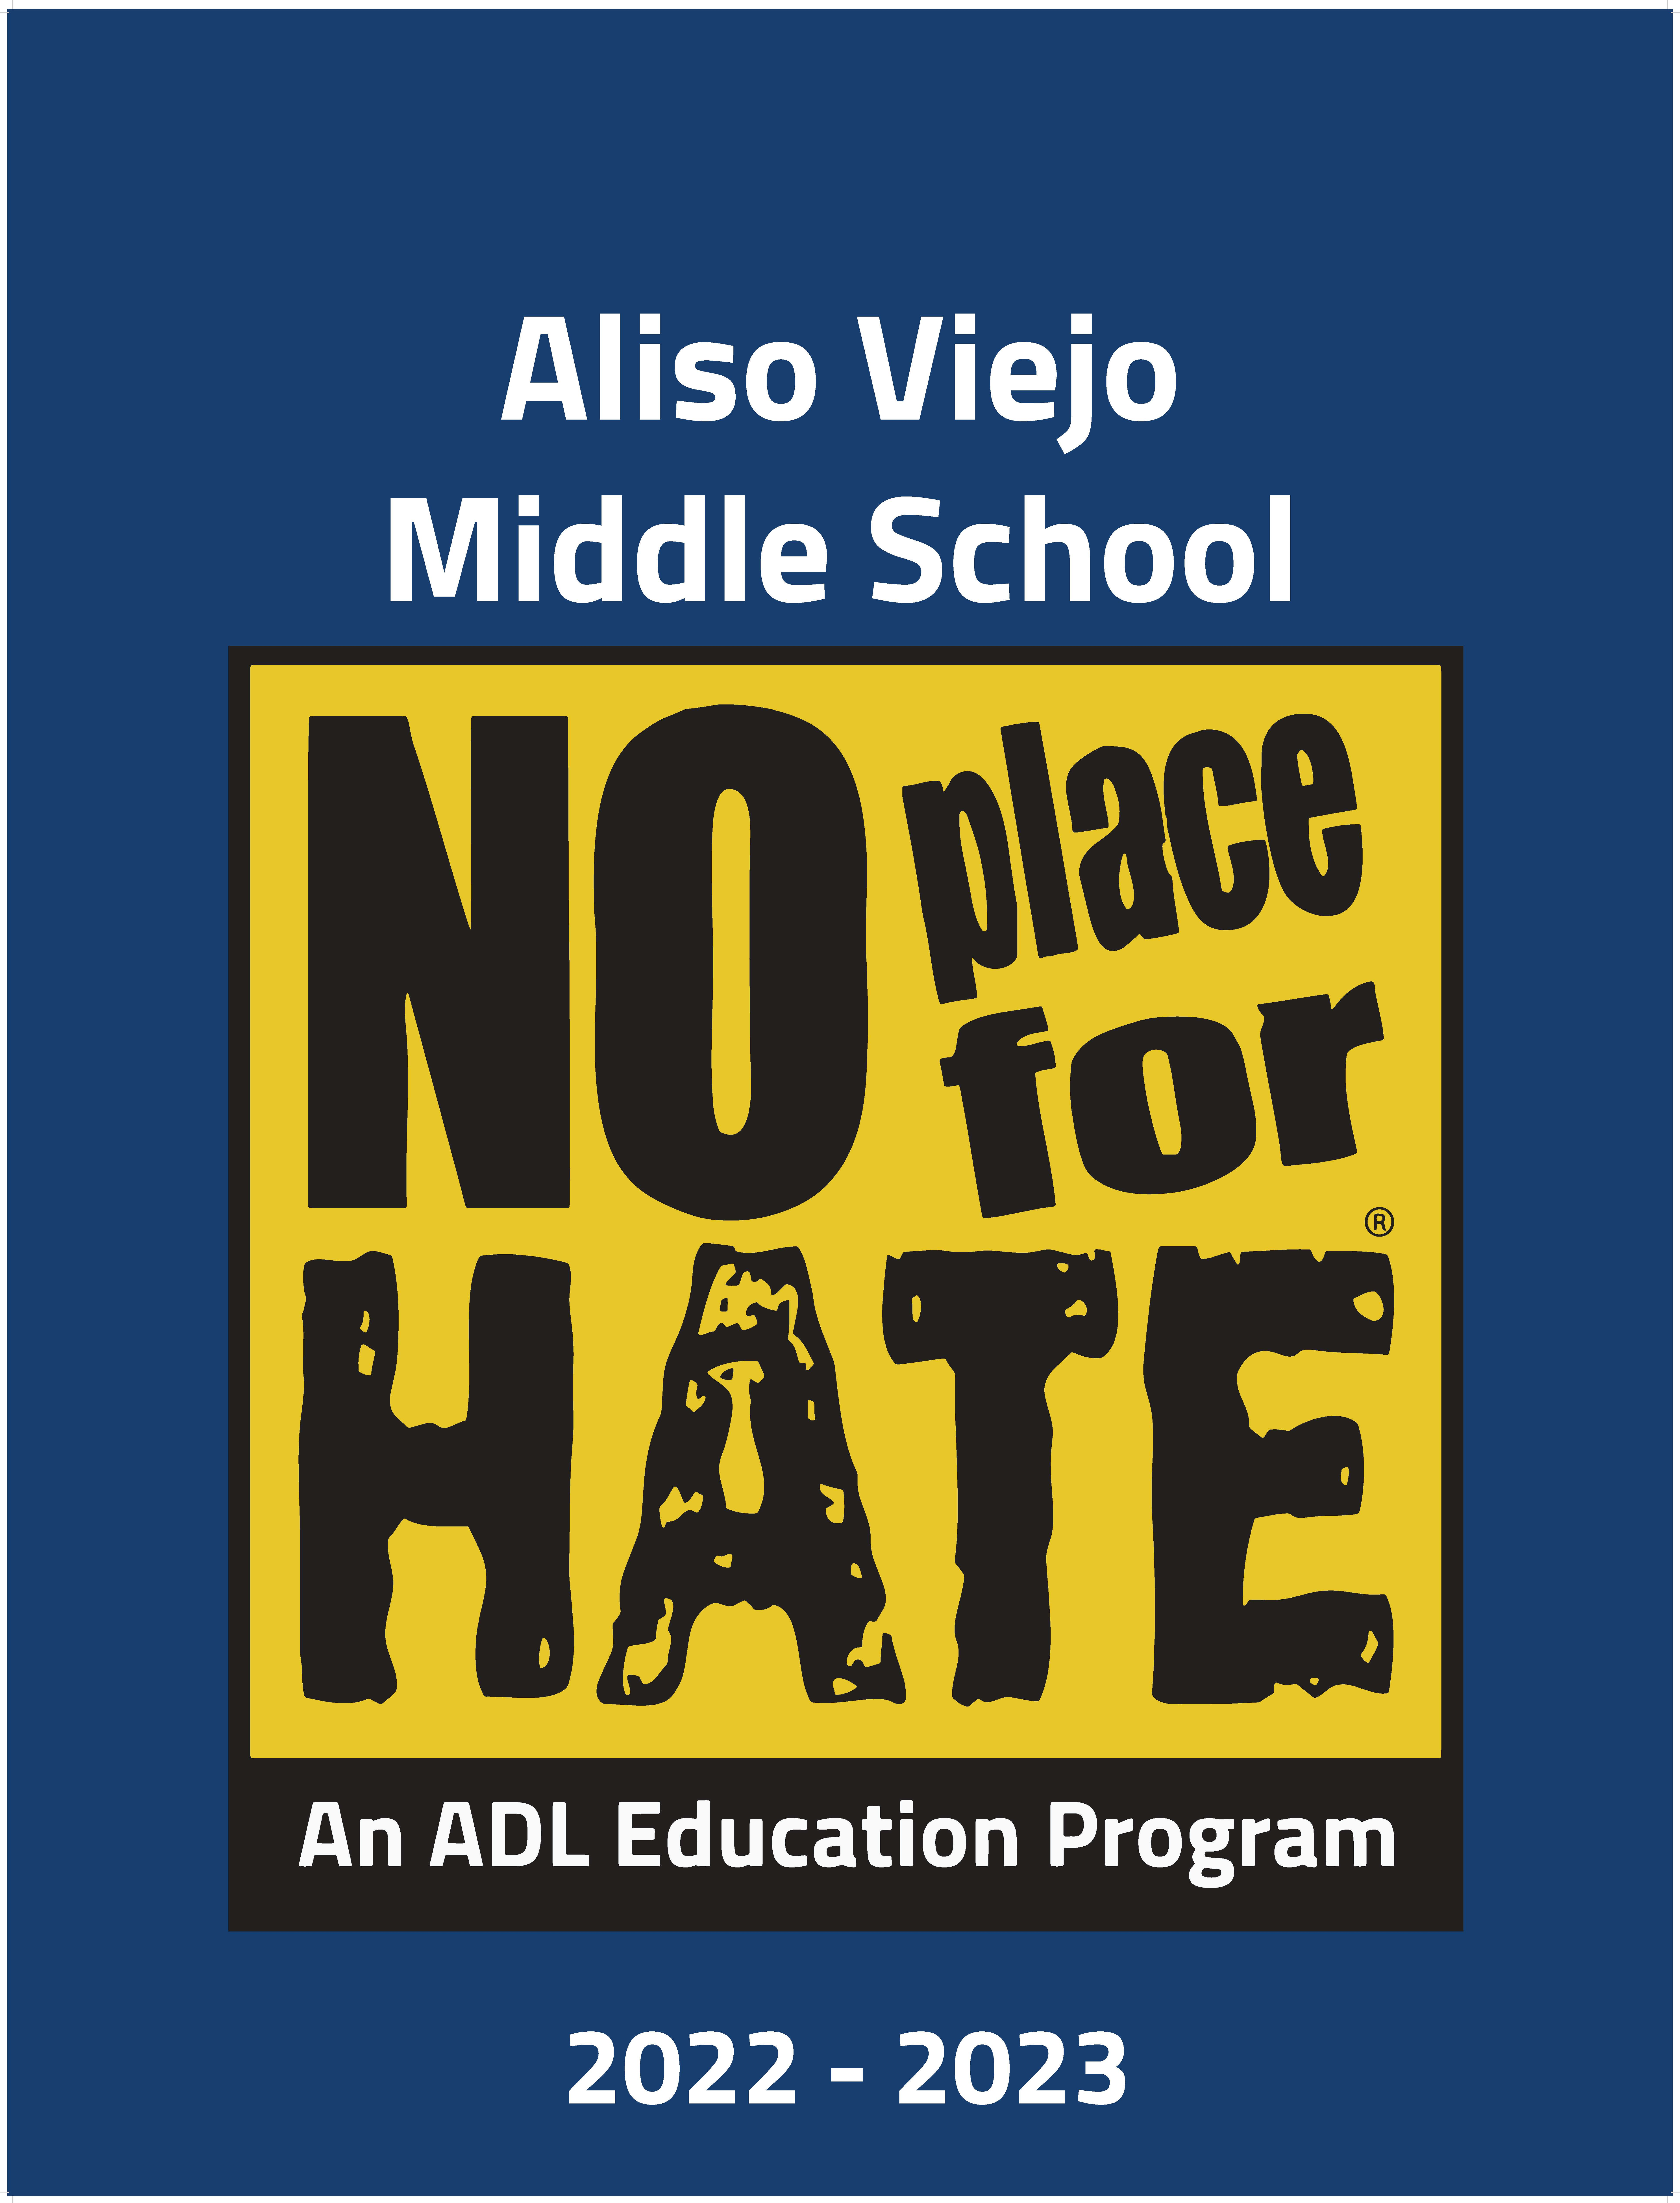 no place for hate banner